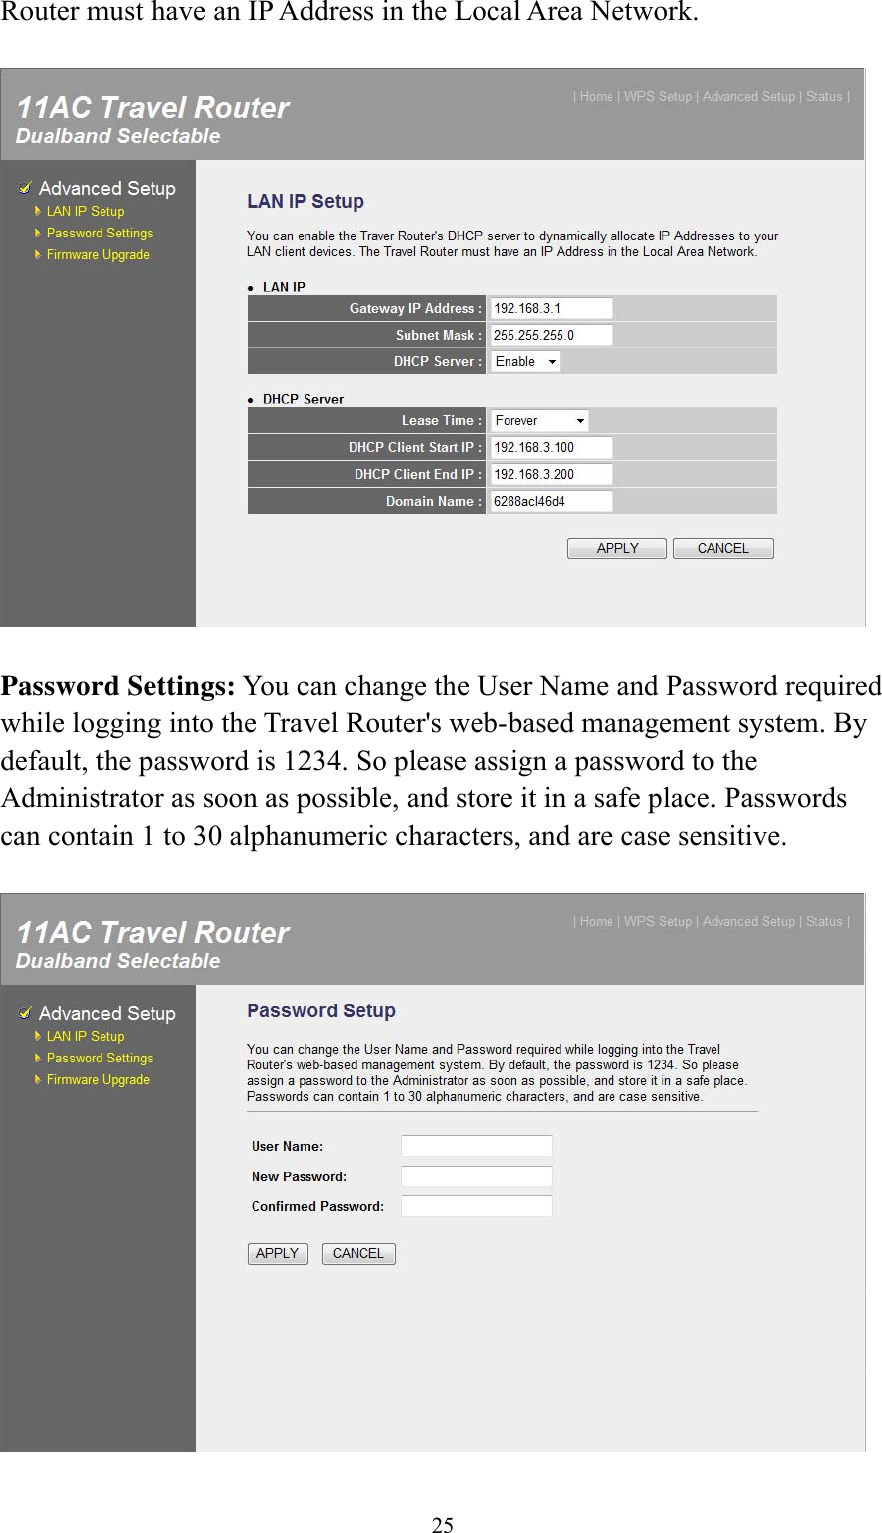 25 Router must have an IP Address in the Local Area Network.    Password Settings: You can change the User Name and Password required while logging into the Travel Router&apos;s web-based management system. By default, the password is 1234. So please assign a password to the Administrator as soon as possible, and store it in a safe place. Passwords can contain 1 to 30 alphanumeric characters, and are case sensitive.    